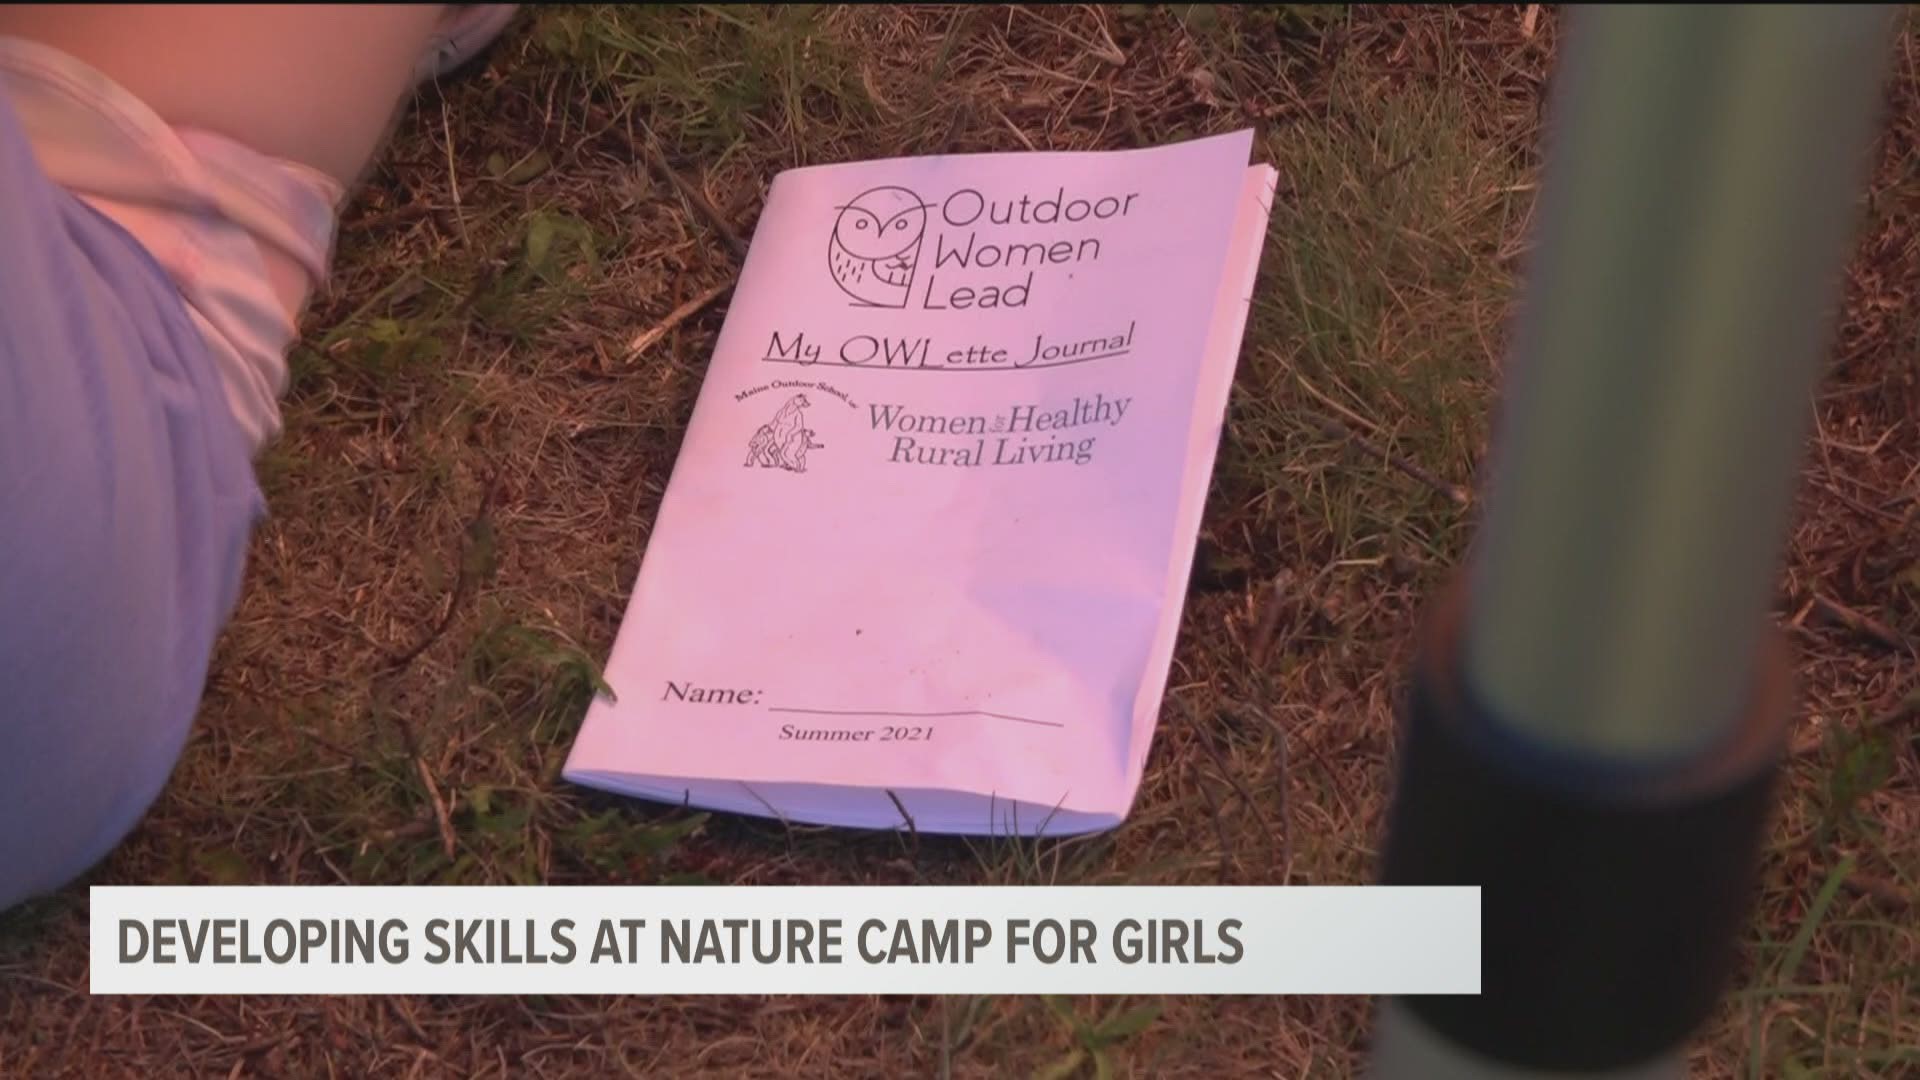 The camp is a way for girls to feel comfortable and learn skills about how to enjoy the natural world.